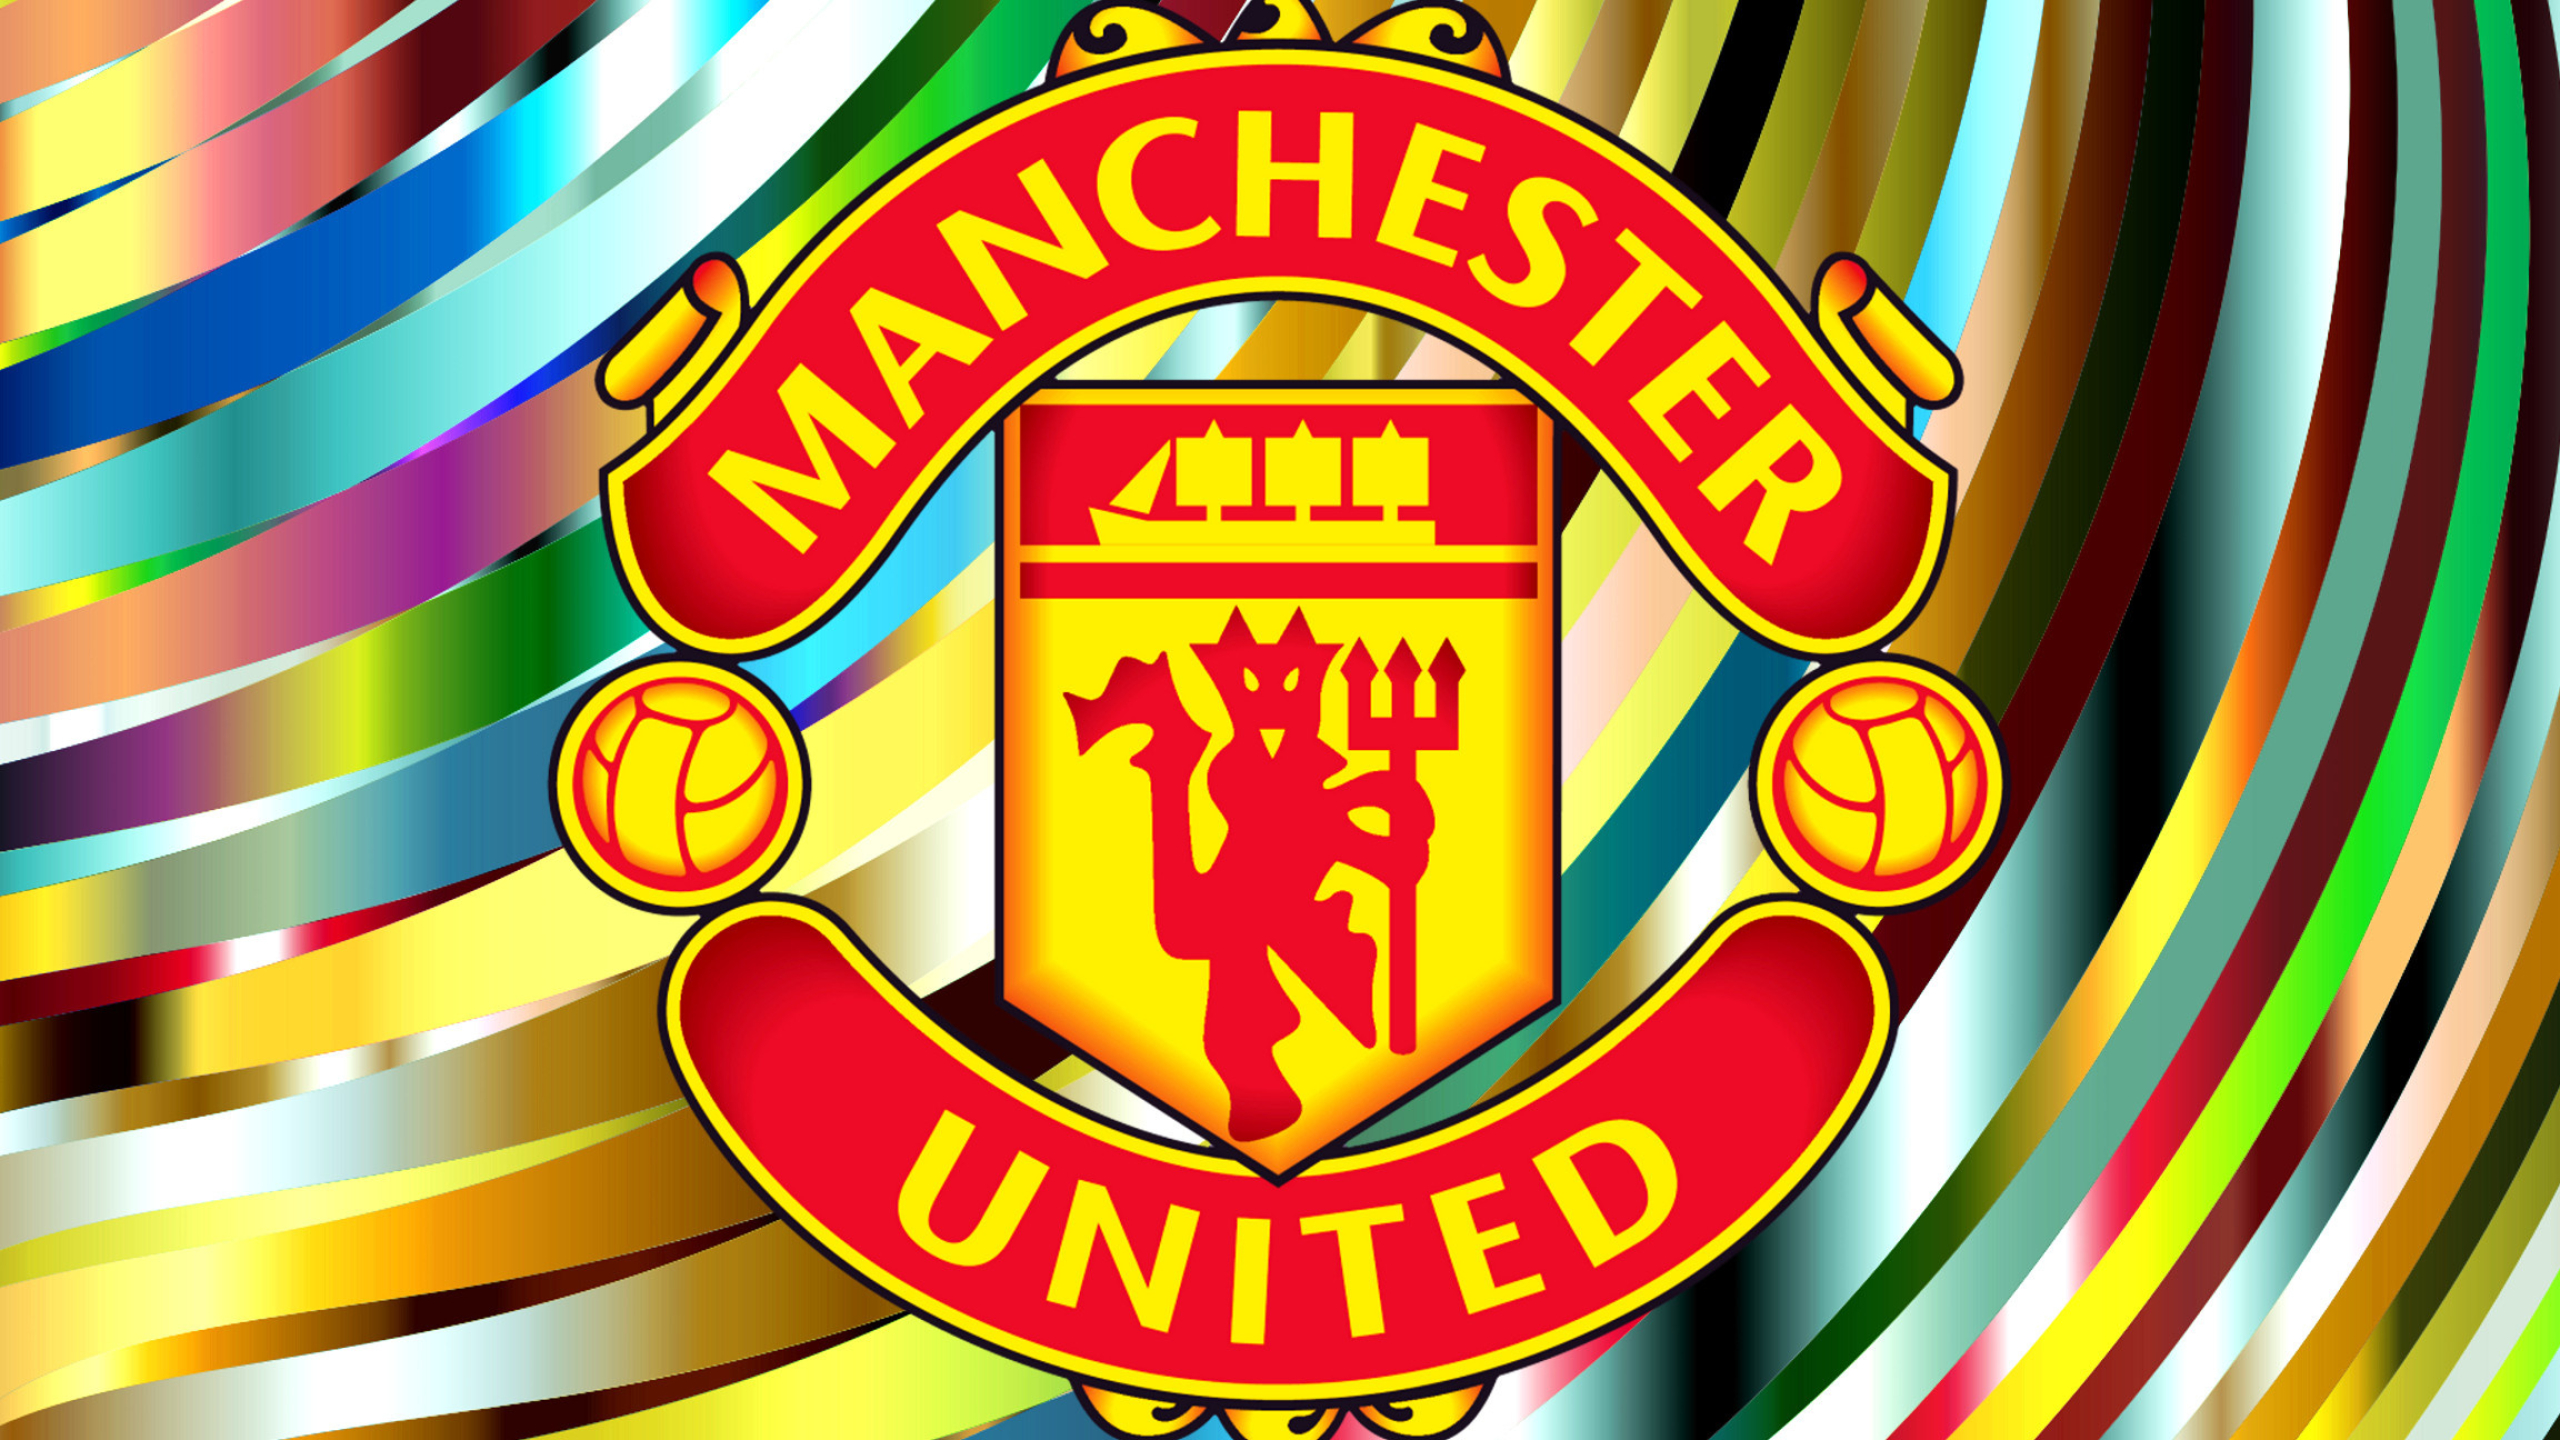 Manchester United: Purchased by American businessman Malcolm Glazer in 2005. 2560x1440 HD Background.